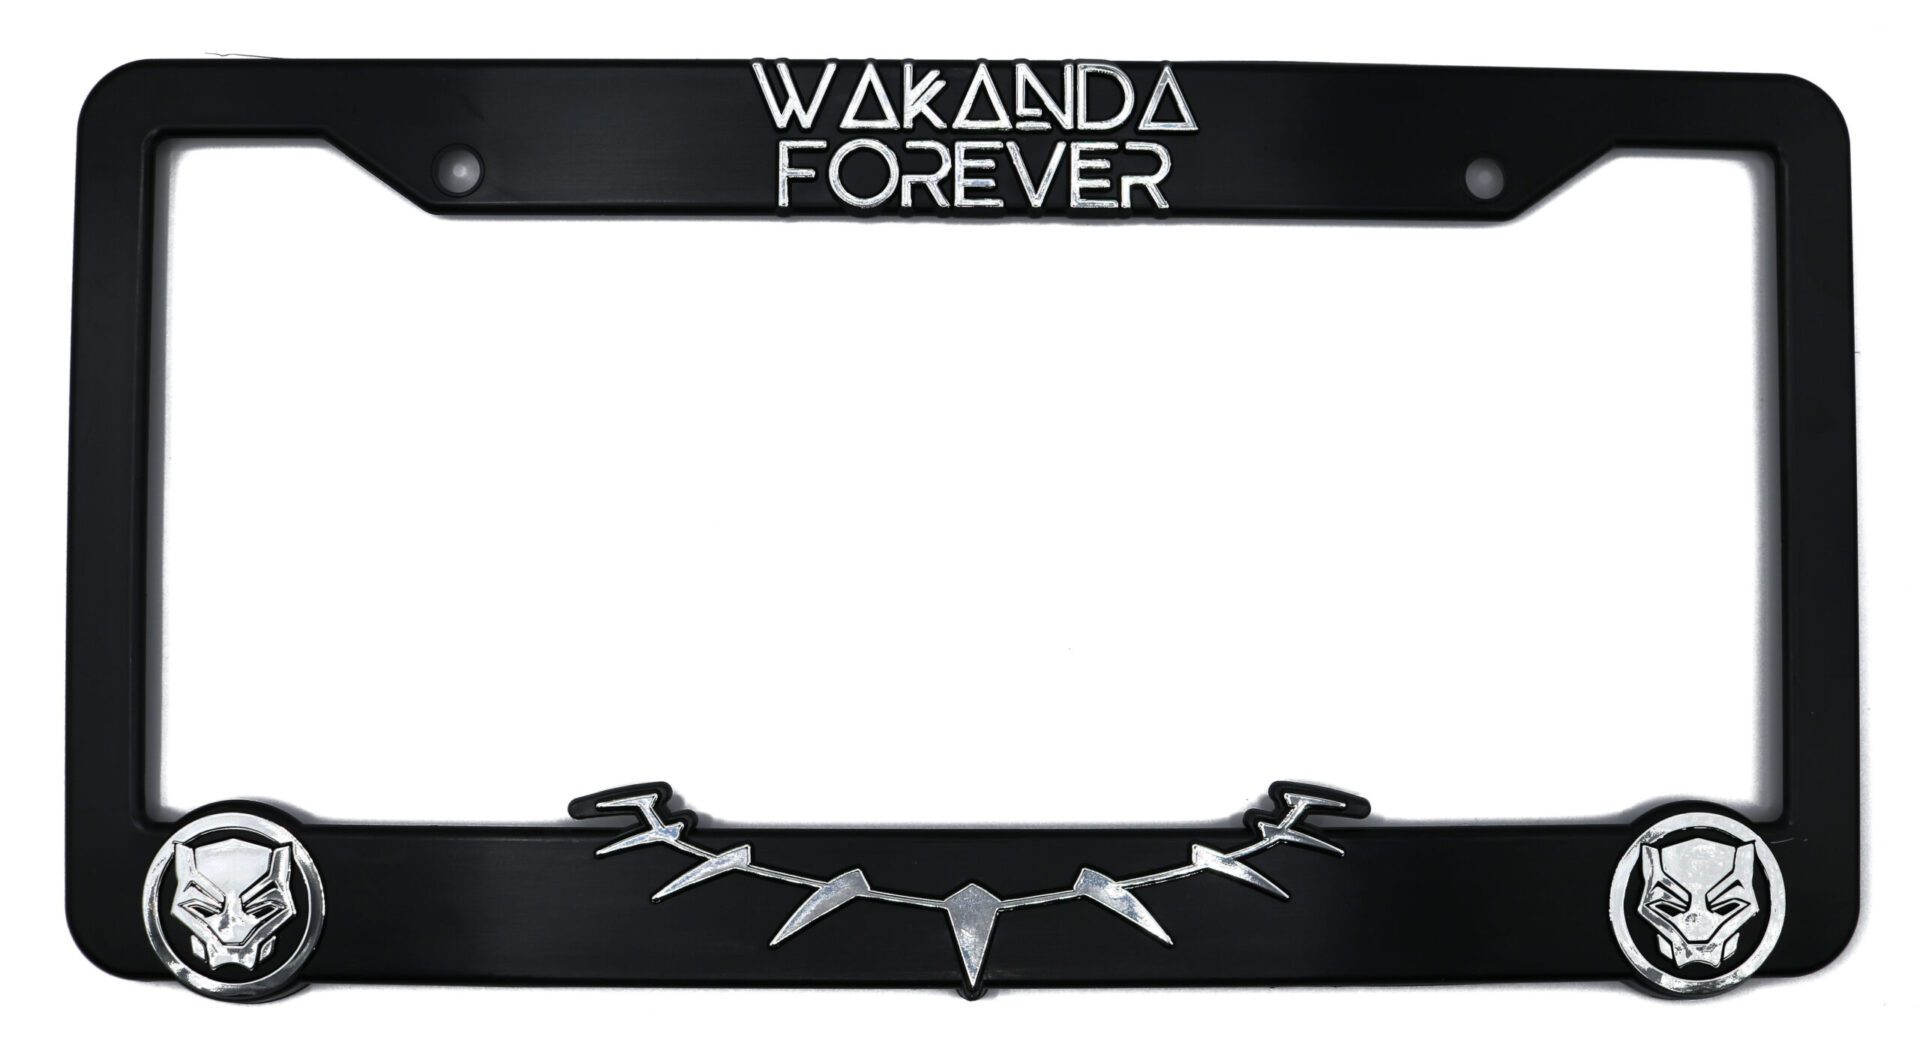 Wakanda Forever for Black Panther License Plate Frame